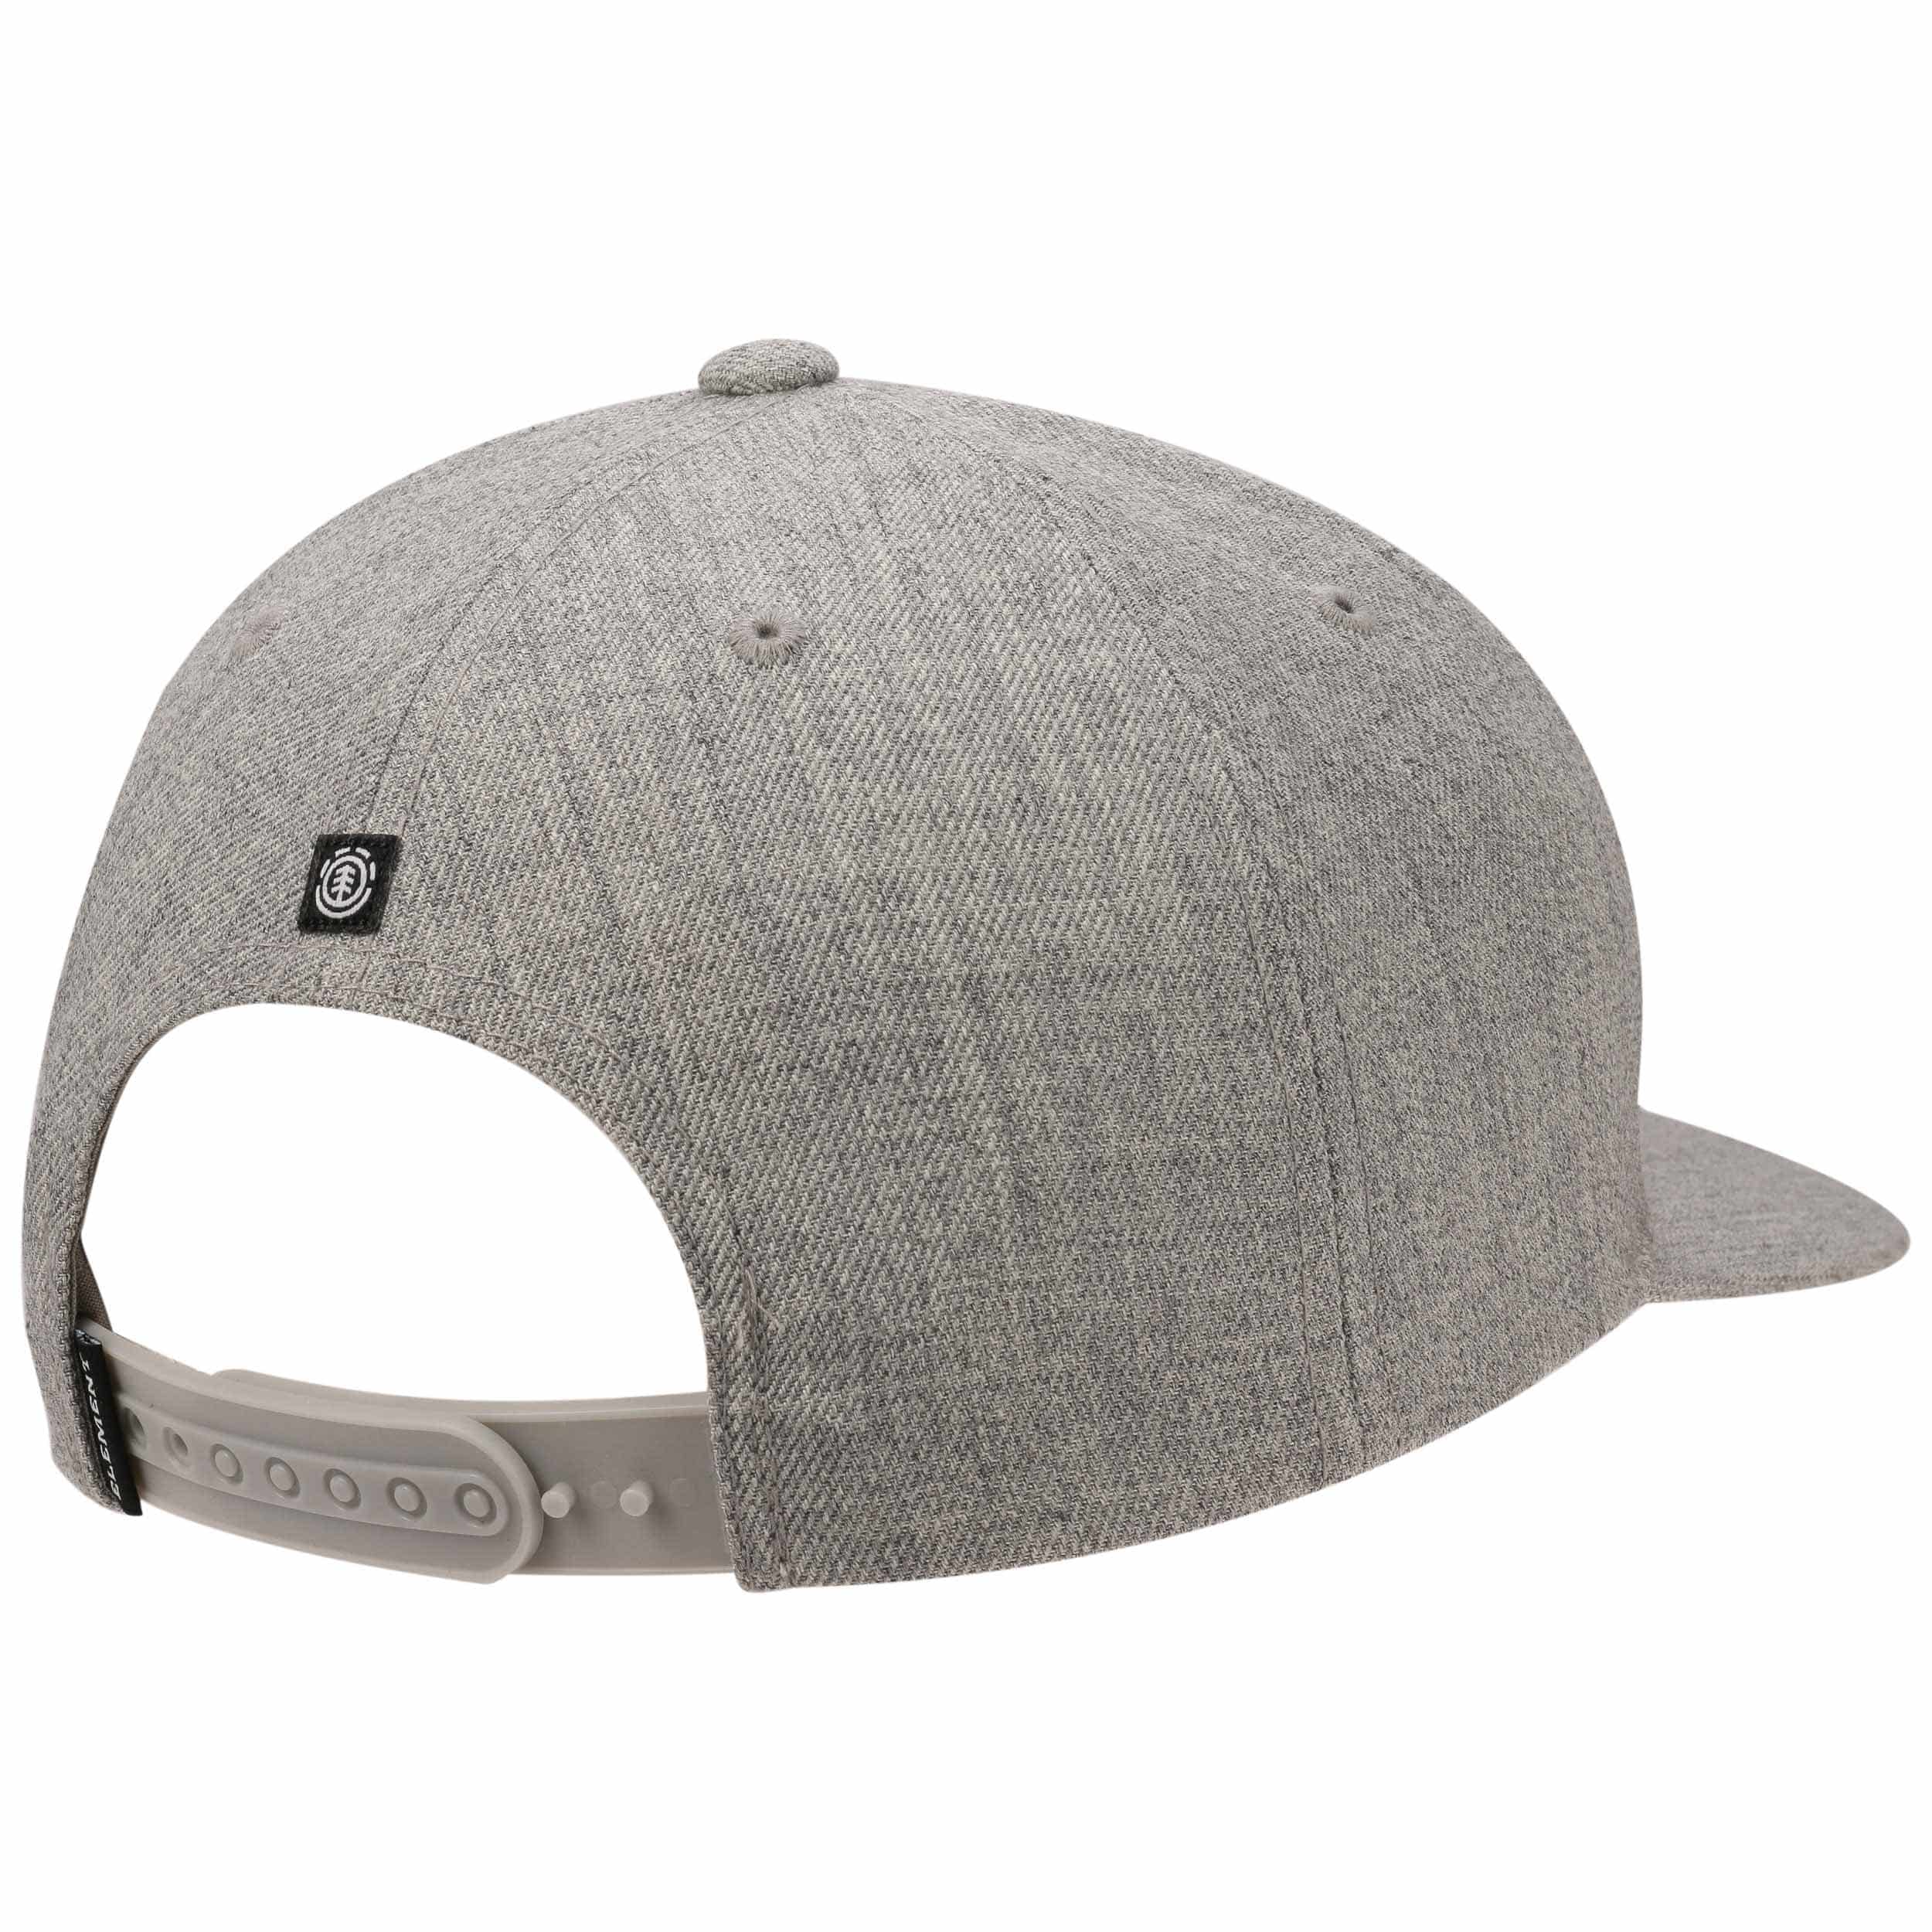 Jagger Snapback Cap by element - 37,95